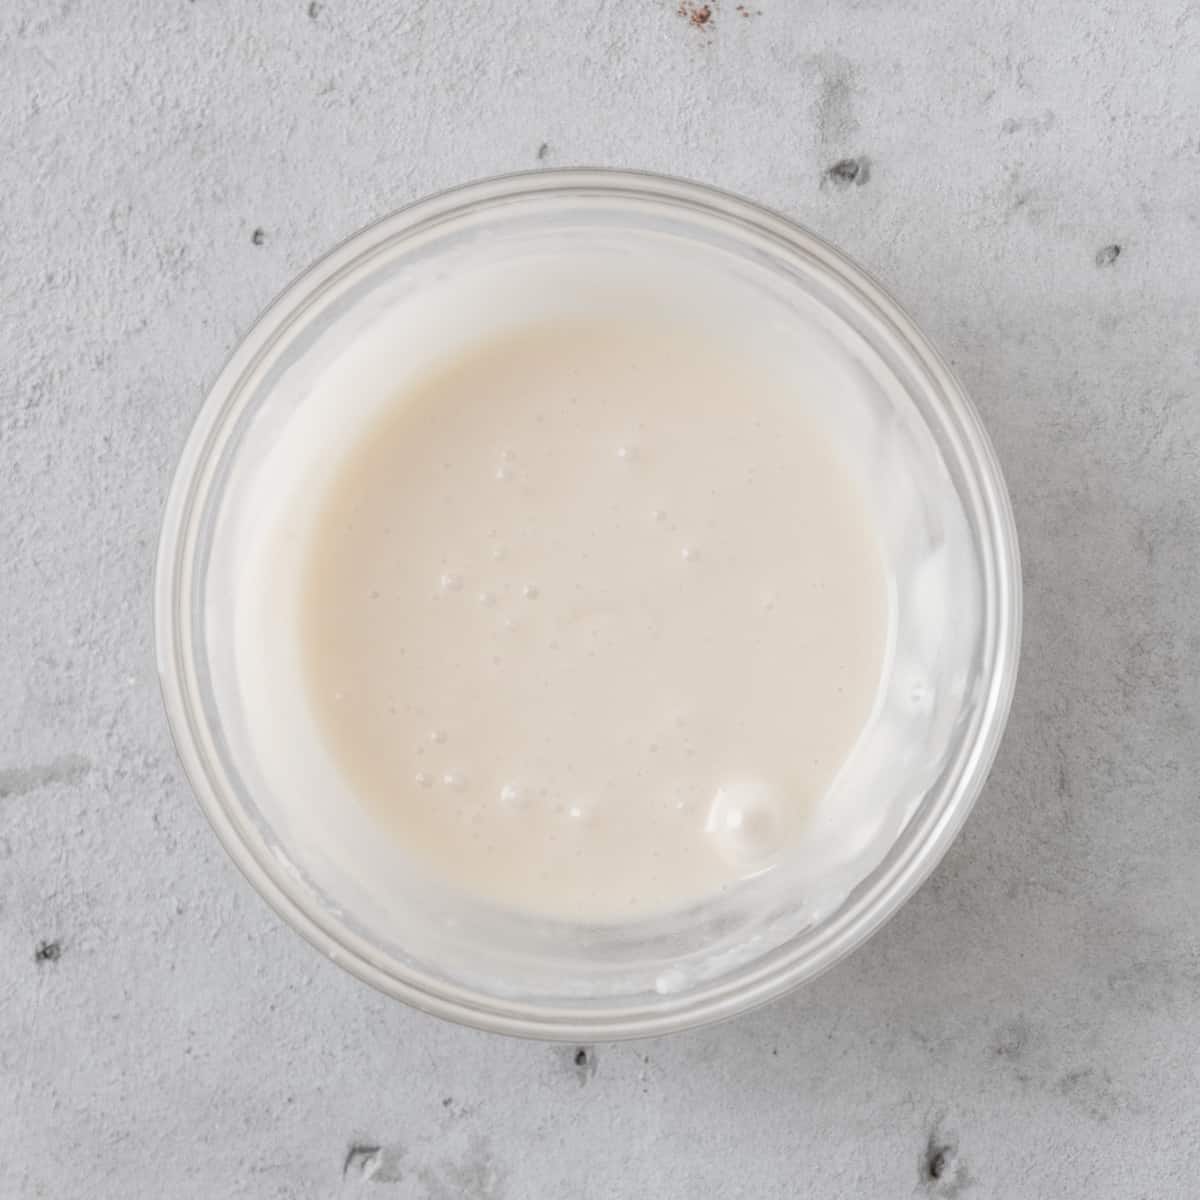 the vanilla glaze in a glass bowl on a grey background